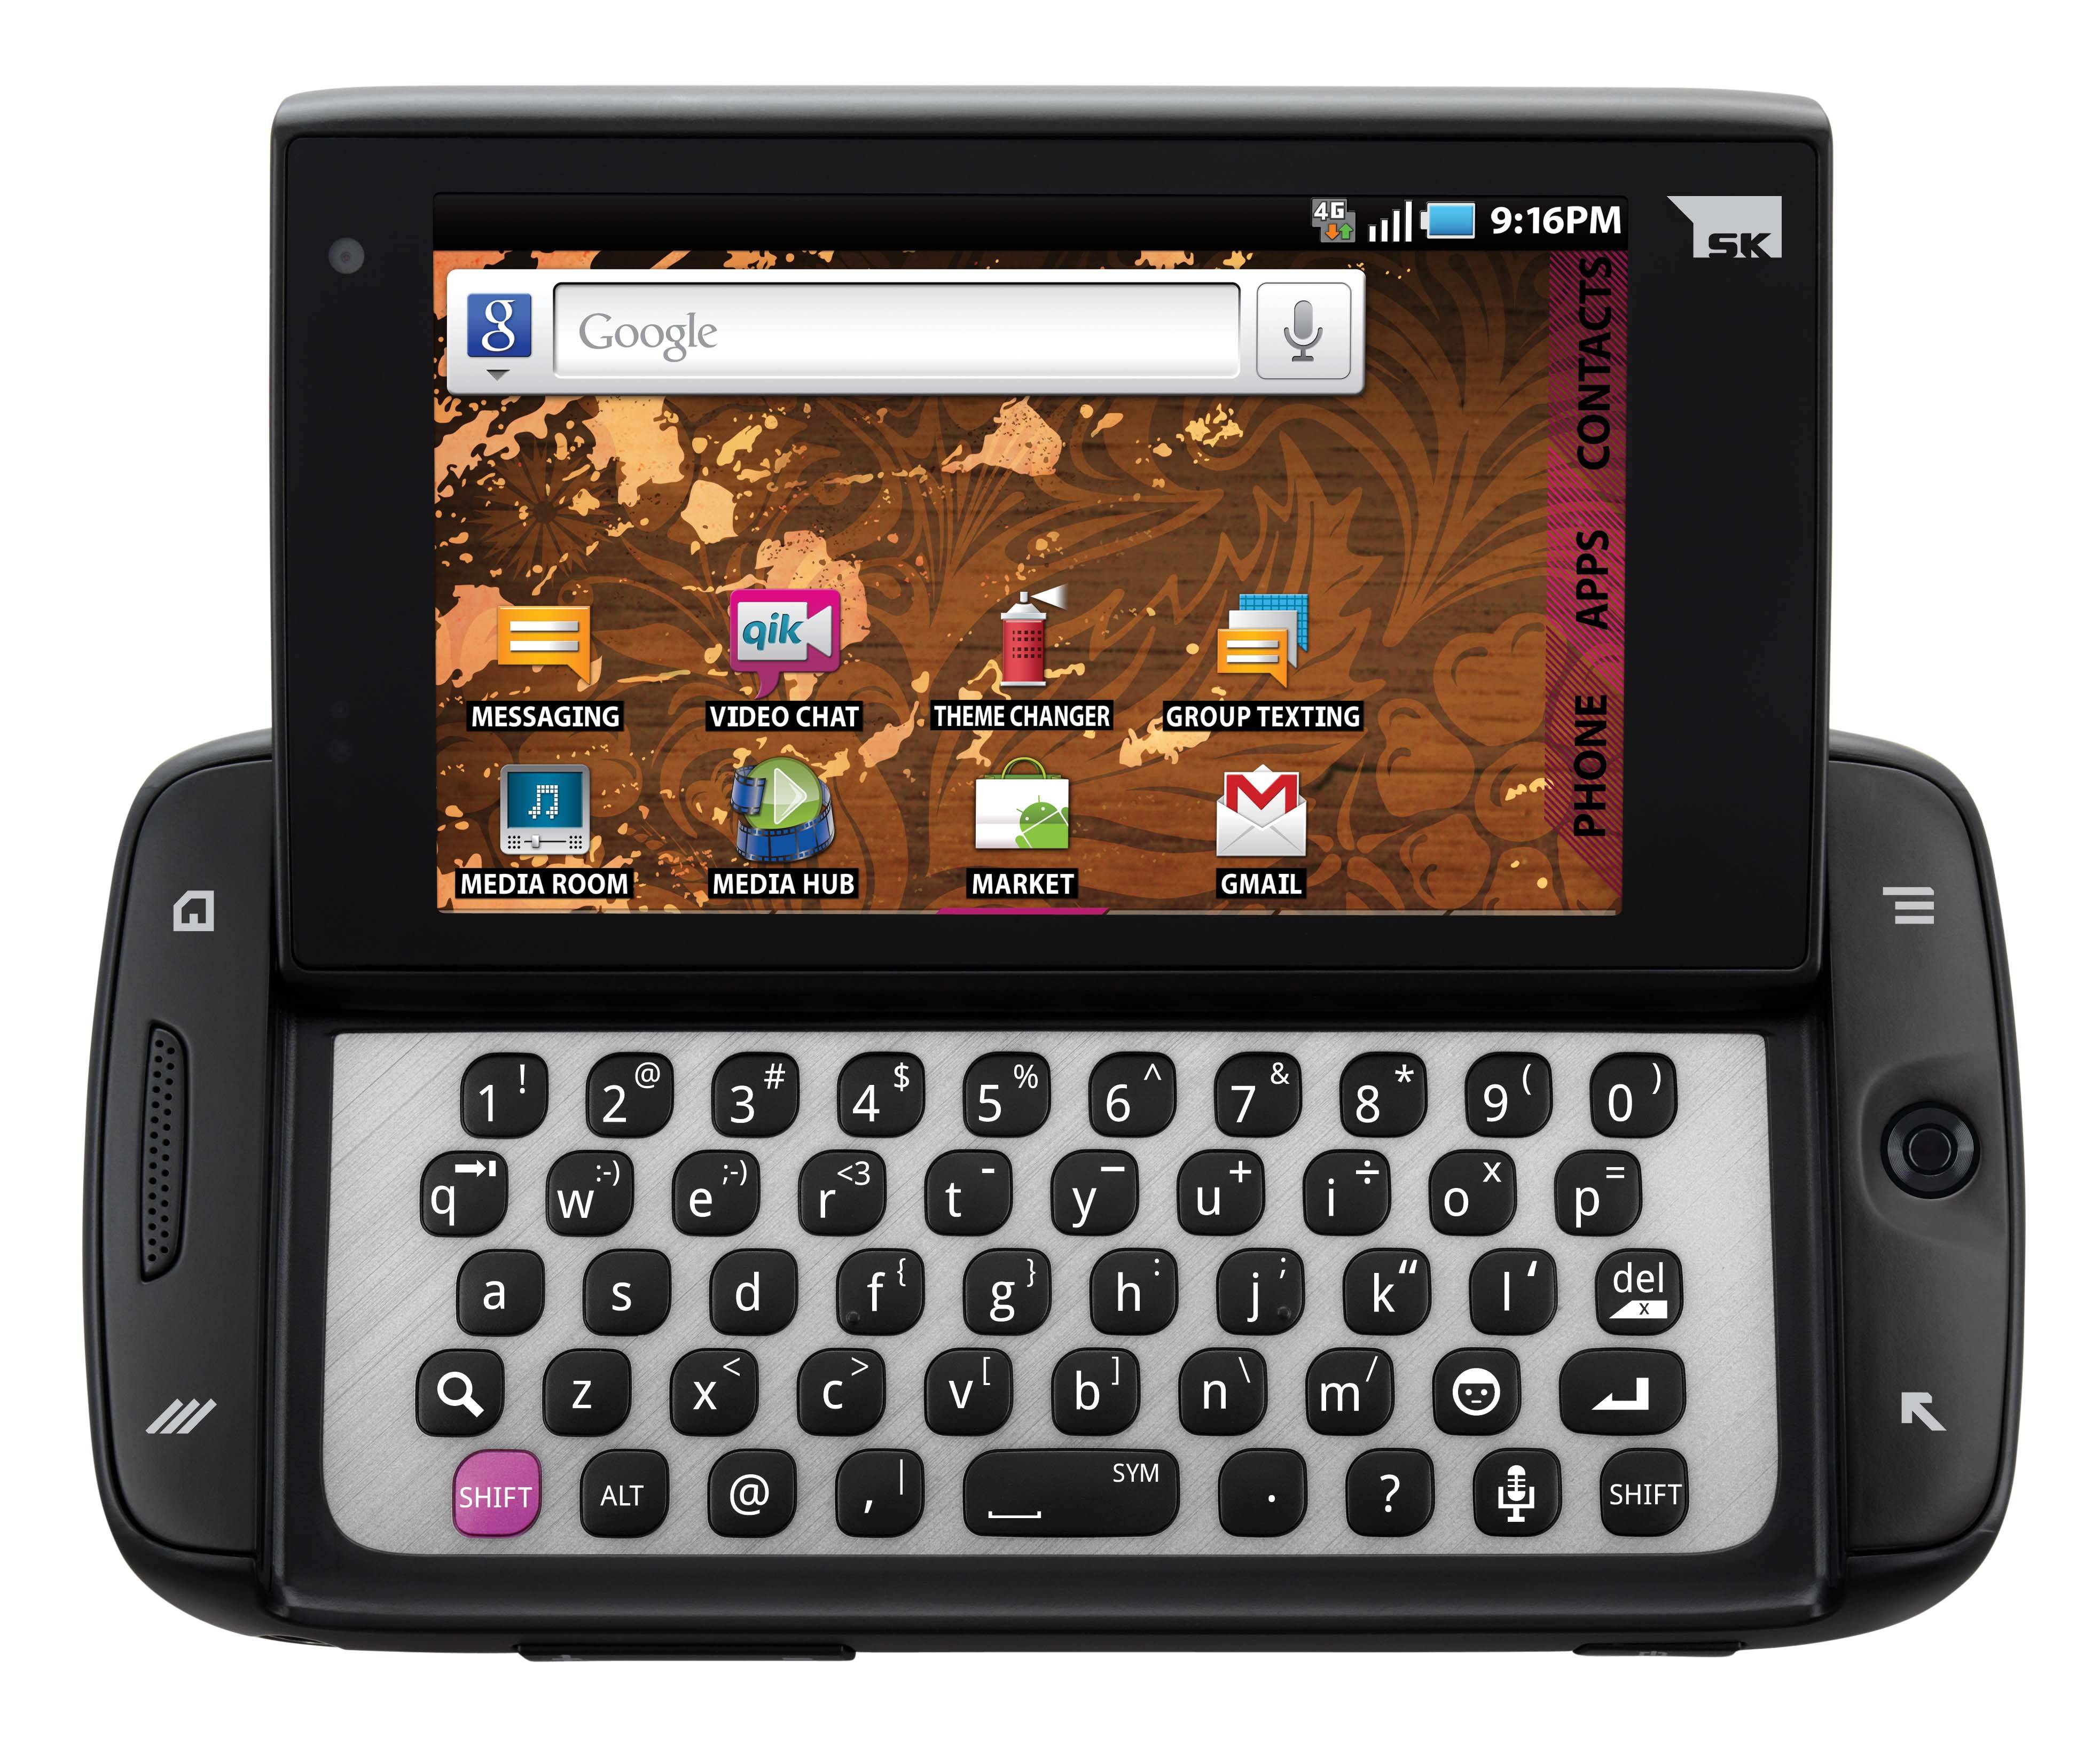 TMobile prices Sidekick 4G messaging phone [Video] Android Community